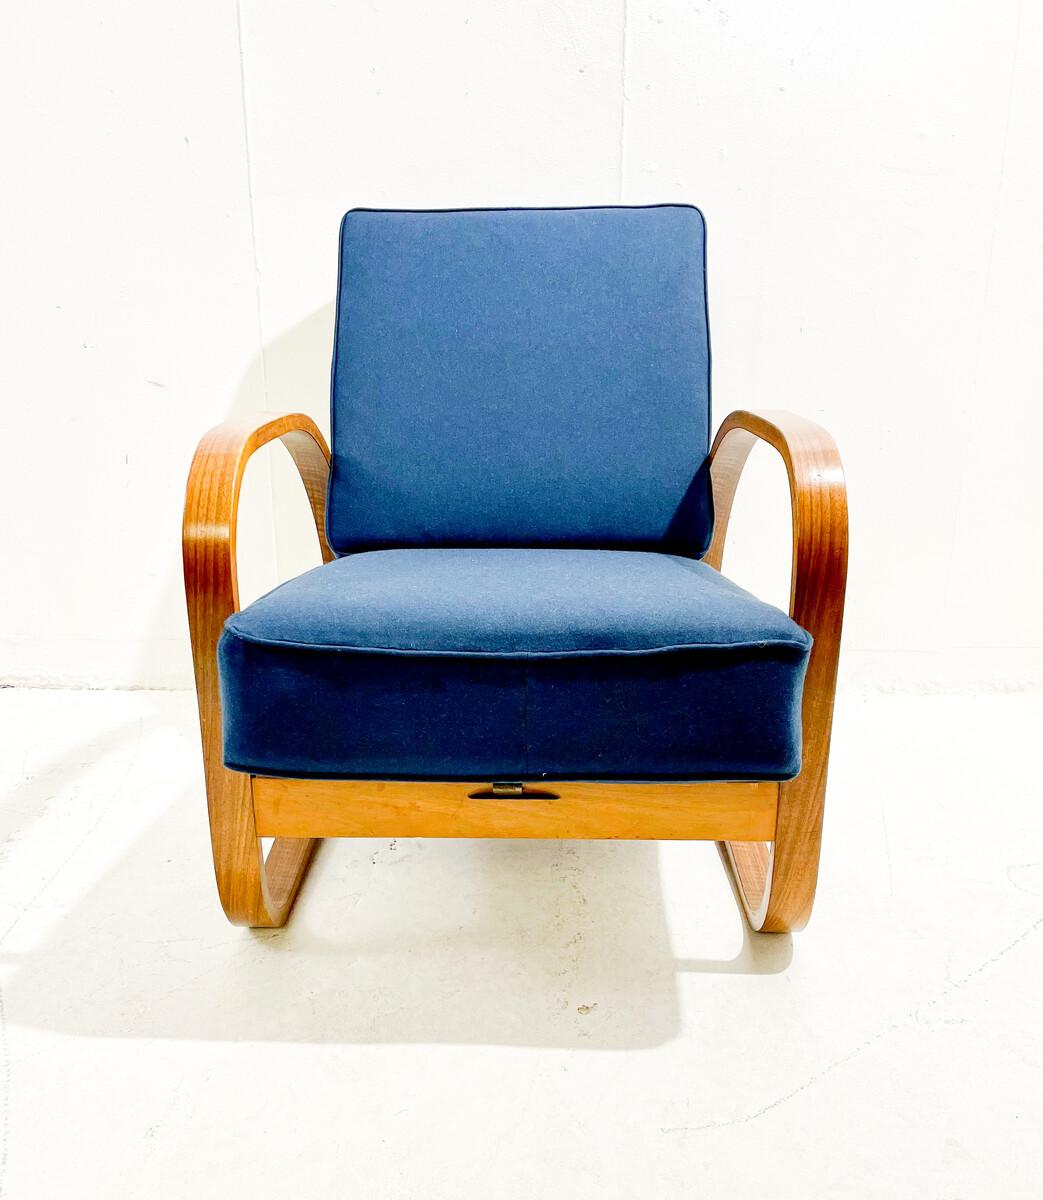 Fabric Bentwood Armchair, Jindrich Halabala with Adjustable Back, Czech Republic, 1940s For Sale